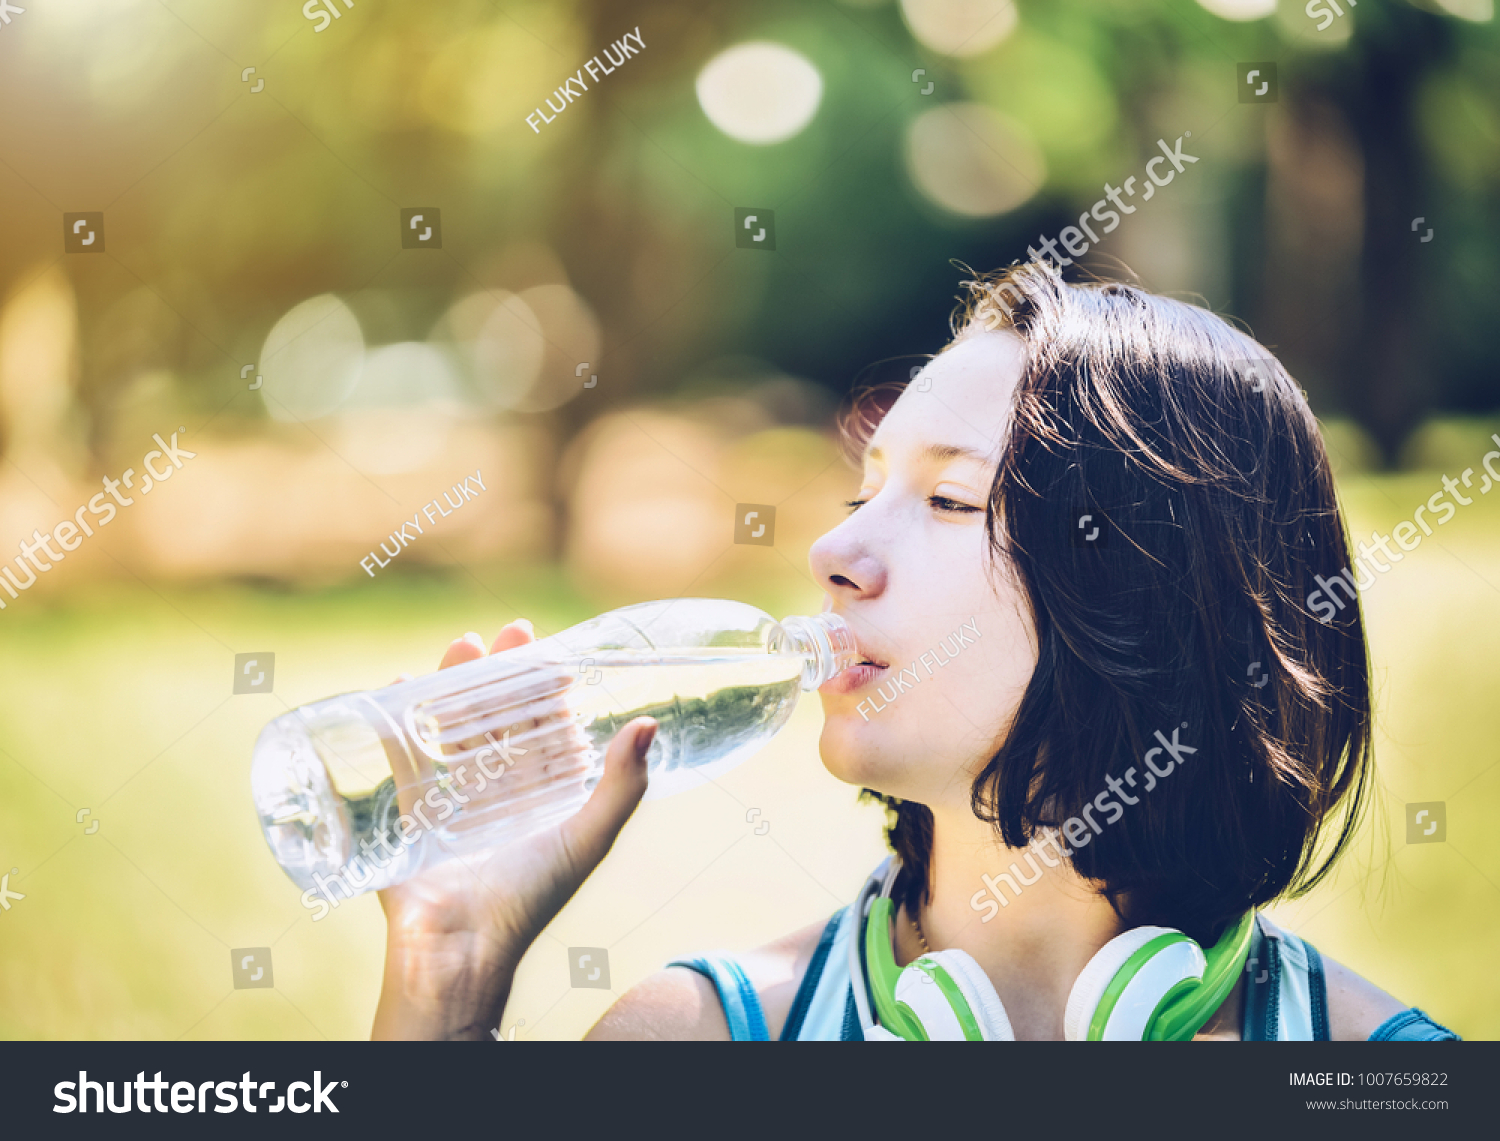 A girl drinking water with thirst after exercise, with a park in the background. #1007659822